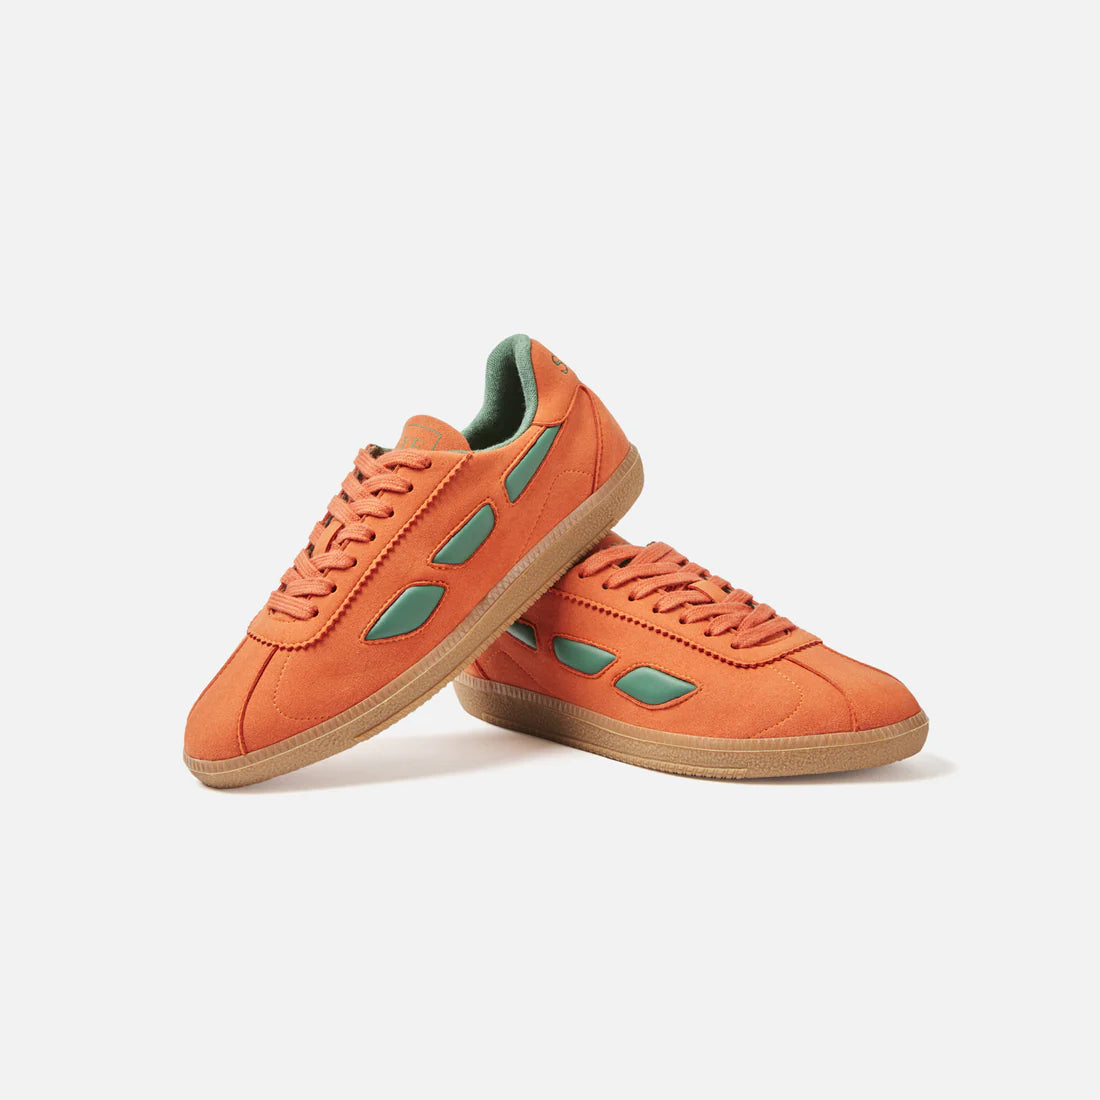 A pair of SAYE Modelo '70 Sneakers - Orange & Green with a retro silhouette.